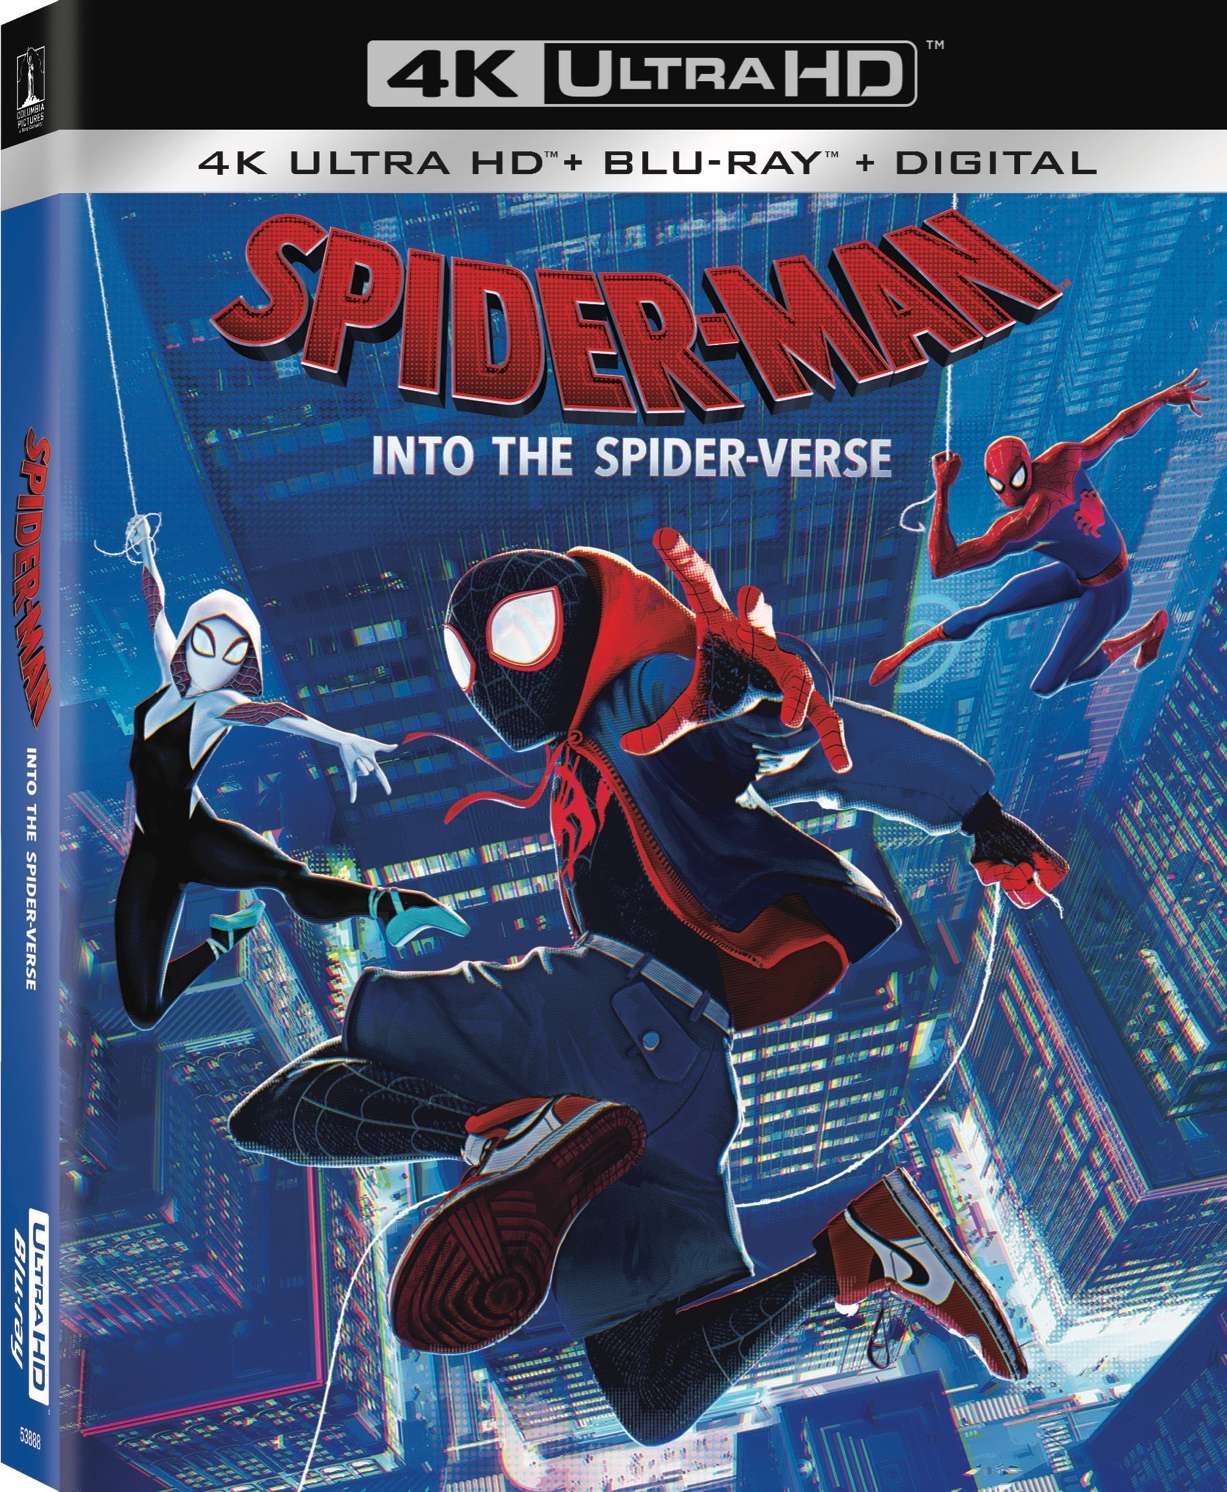 Spiderman Into The Spider-Verse OPENED COLLECTIBLE AMC Cards *FREE SHIP 